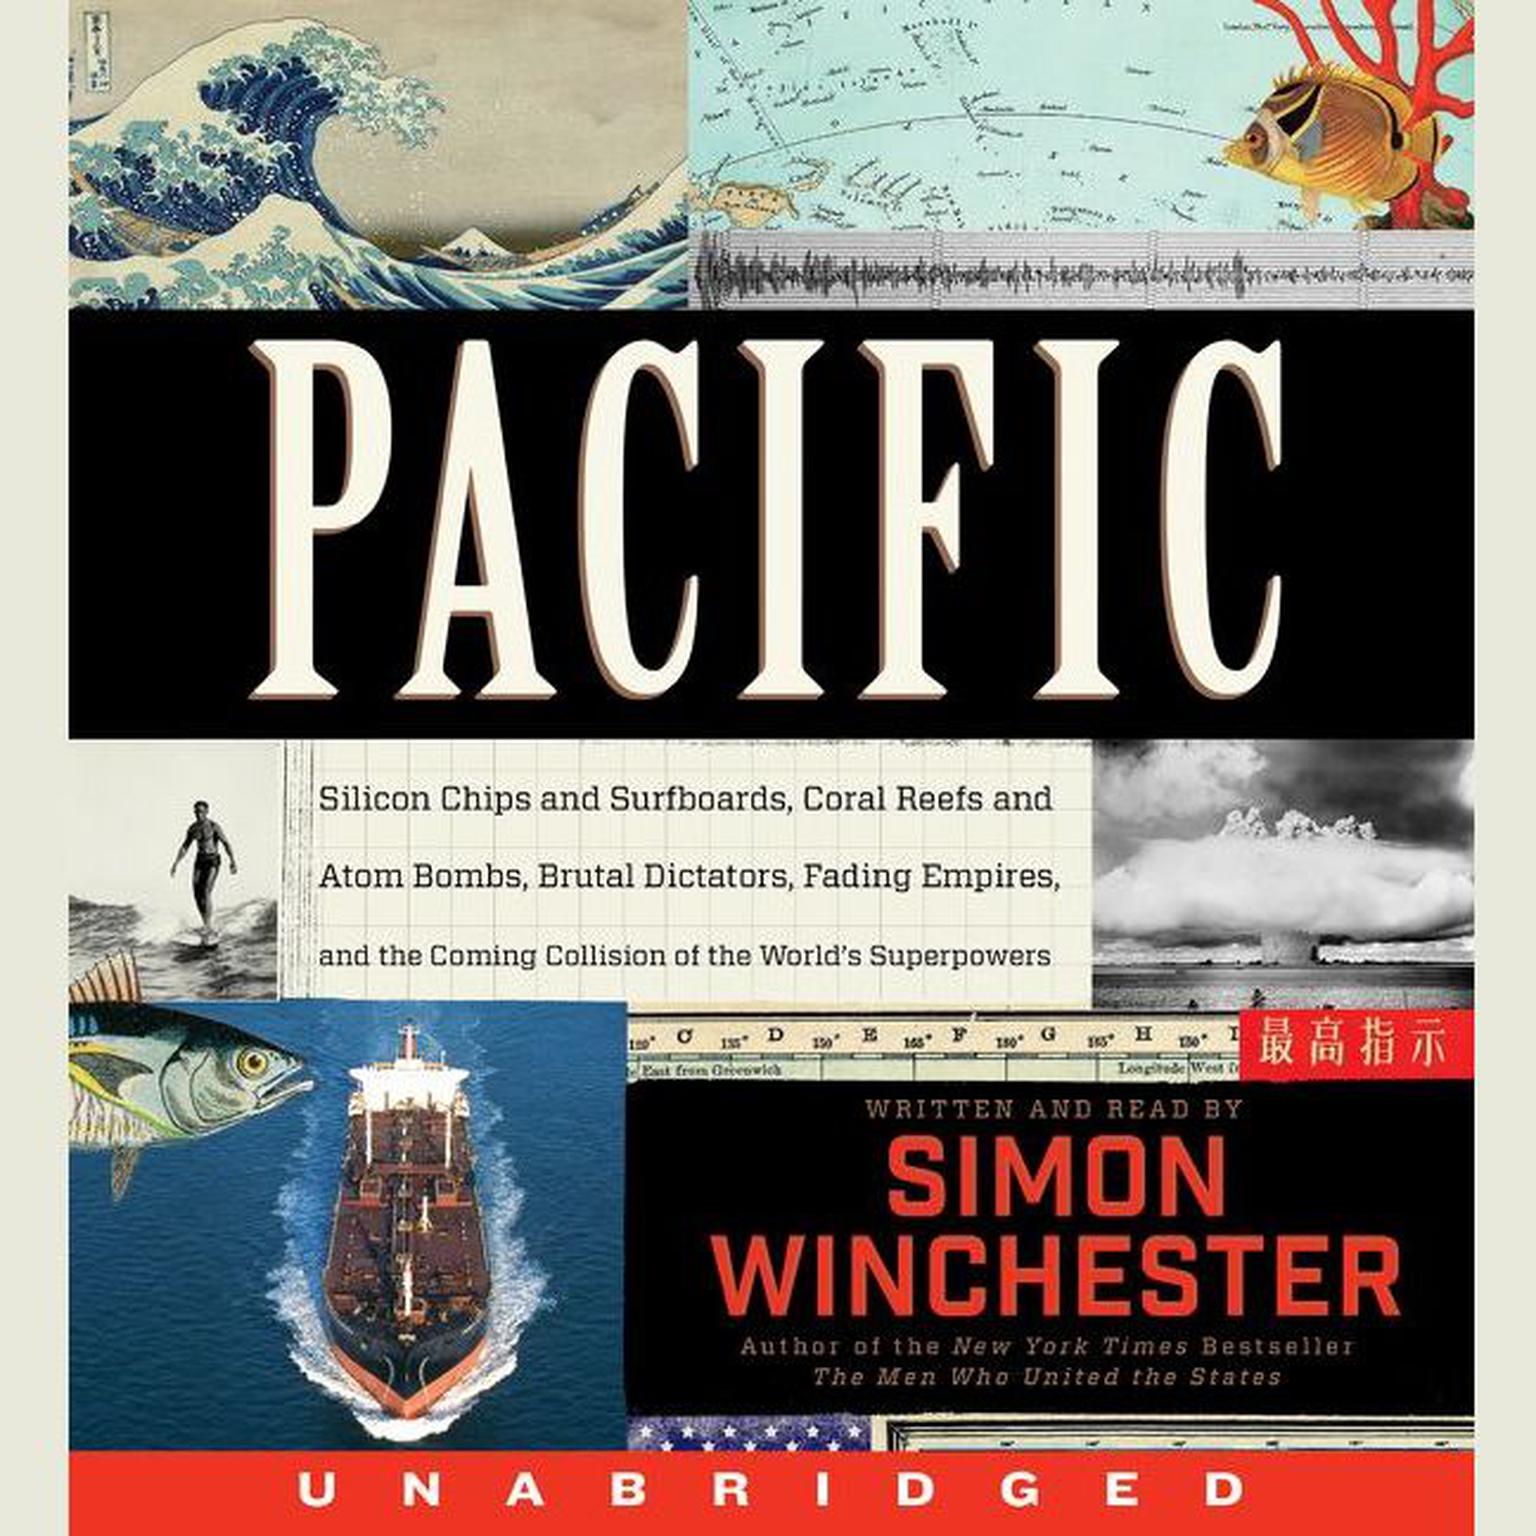 Pacific: Silicon Chips and Surfboards, Coral Reefs and Atom Bombs, Brutal Dictators, Fading Empires, and the Coming Collision of the Worlds Superpowers Audiobook, by Simon Winchester